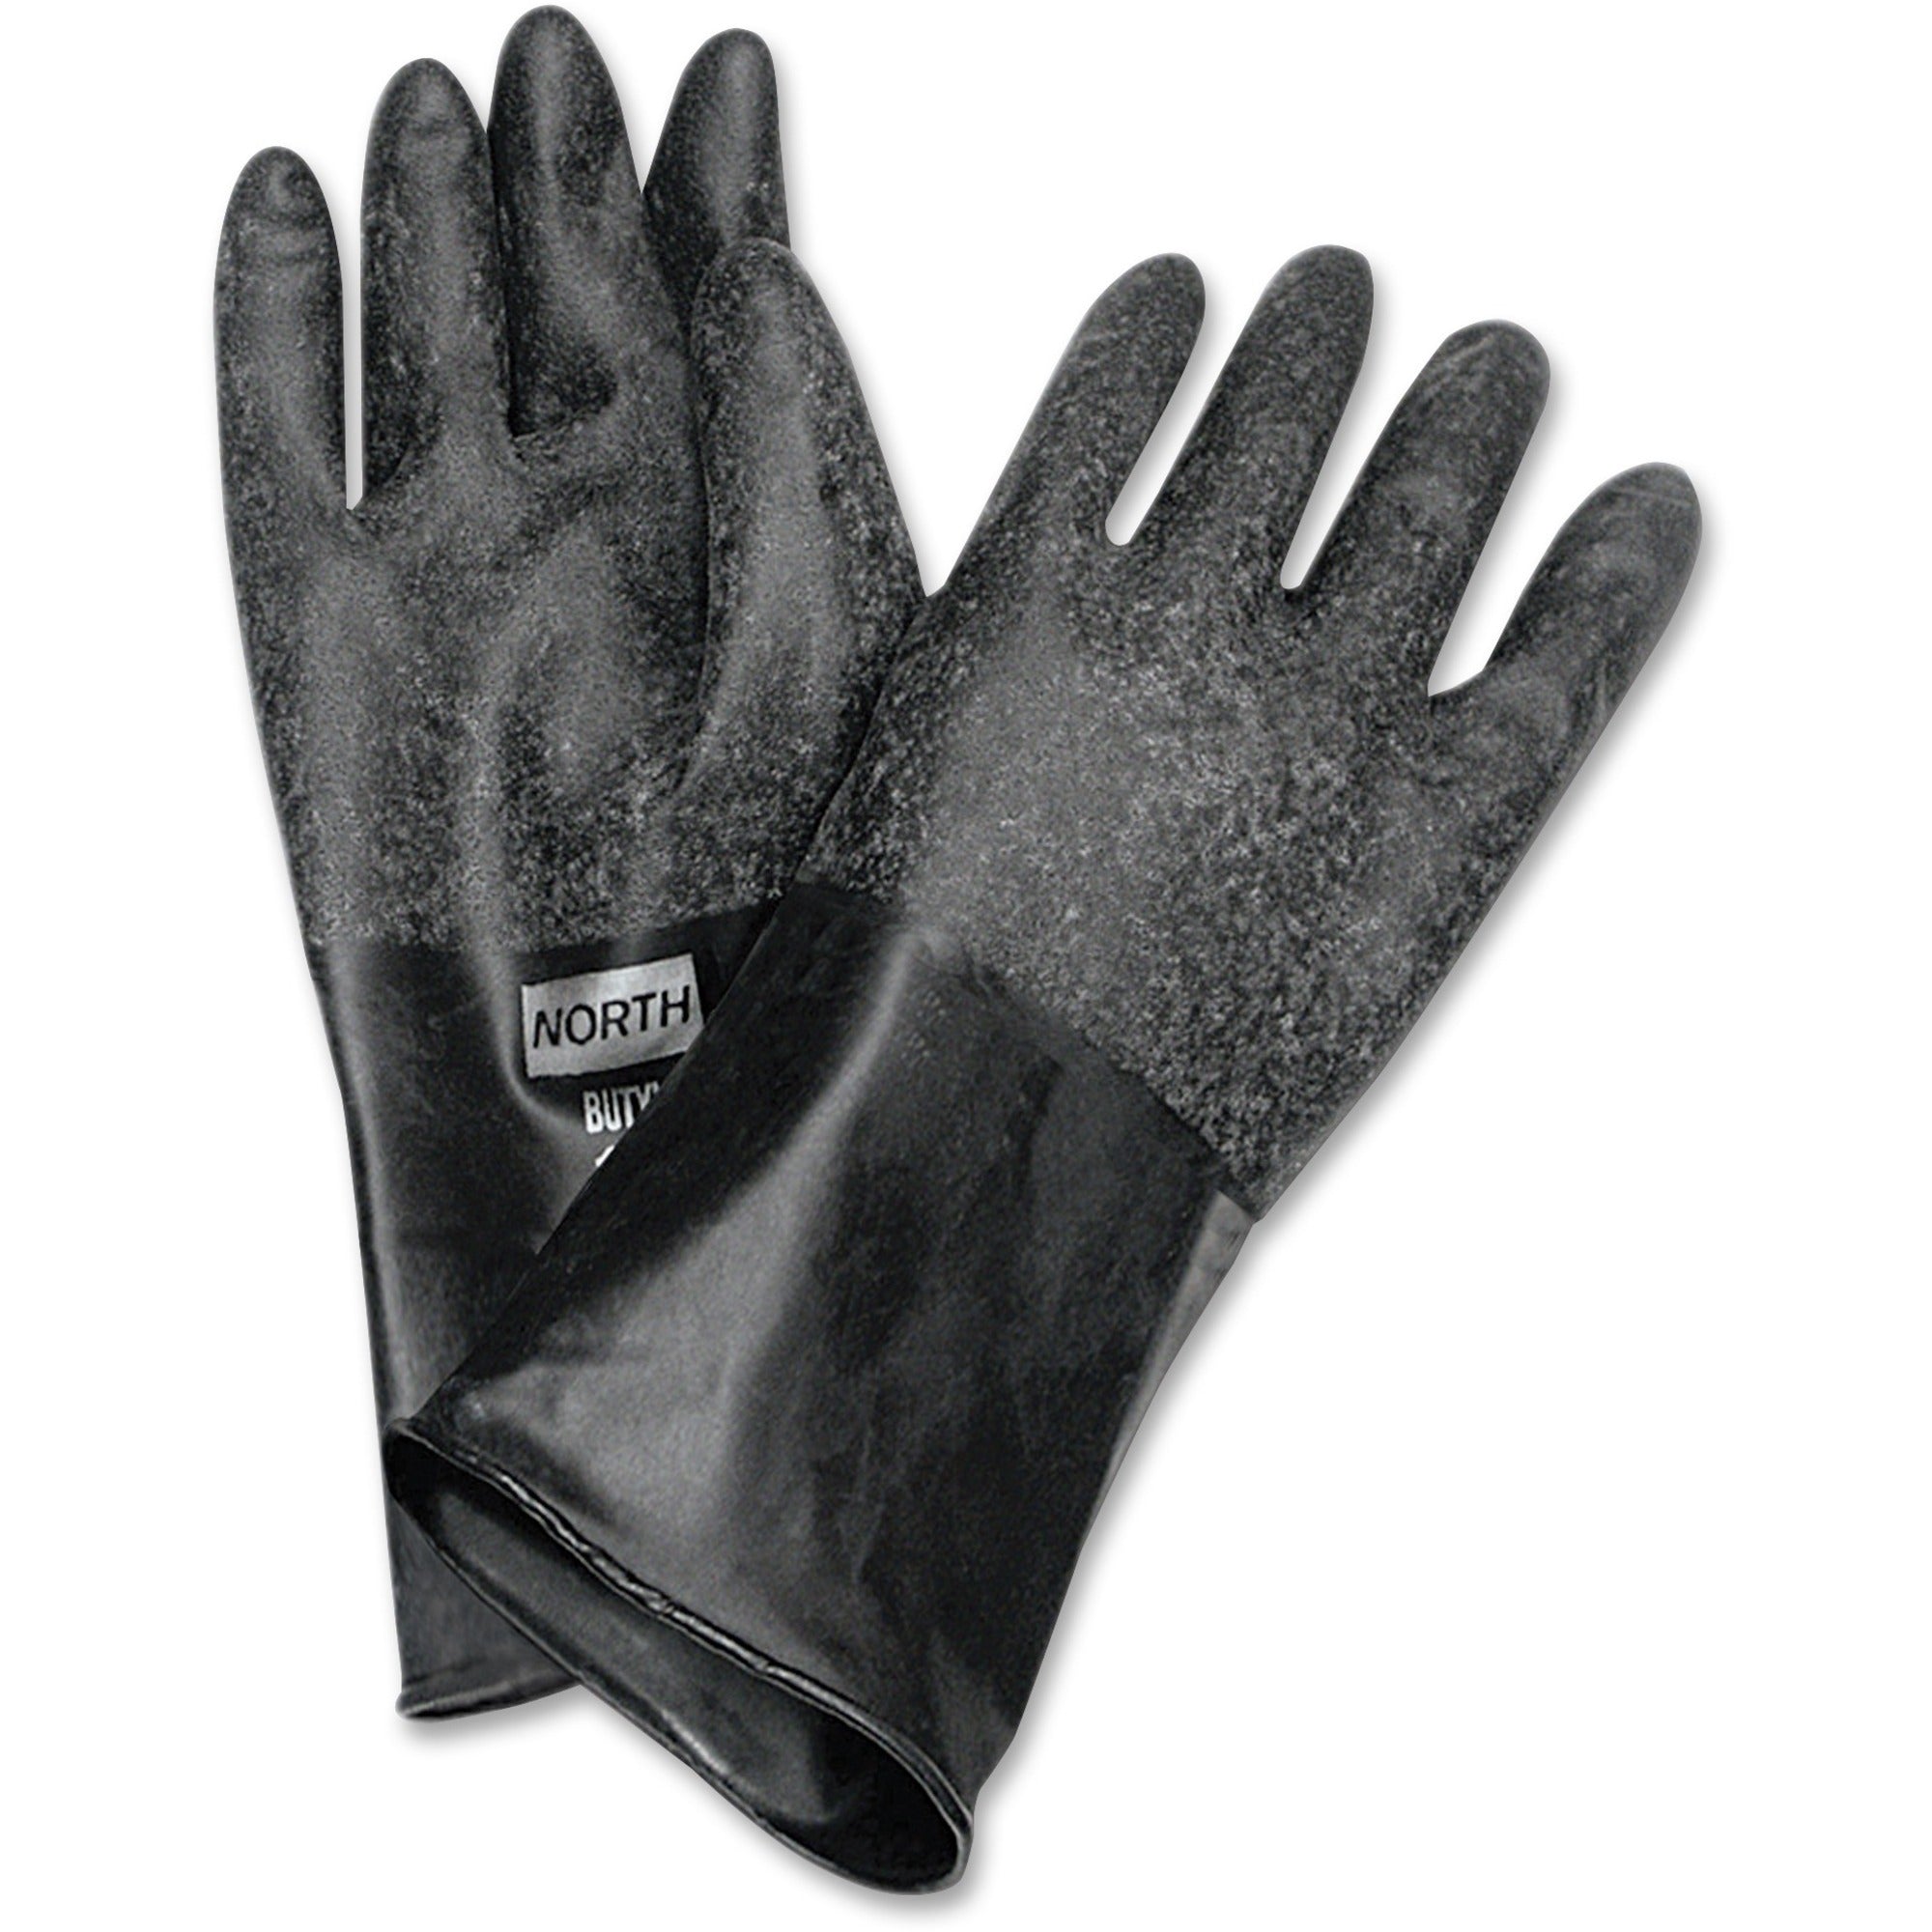 NORTH 14" Unsupported Butyl Gloves - 